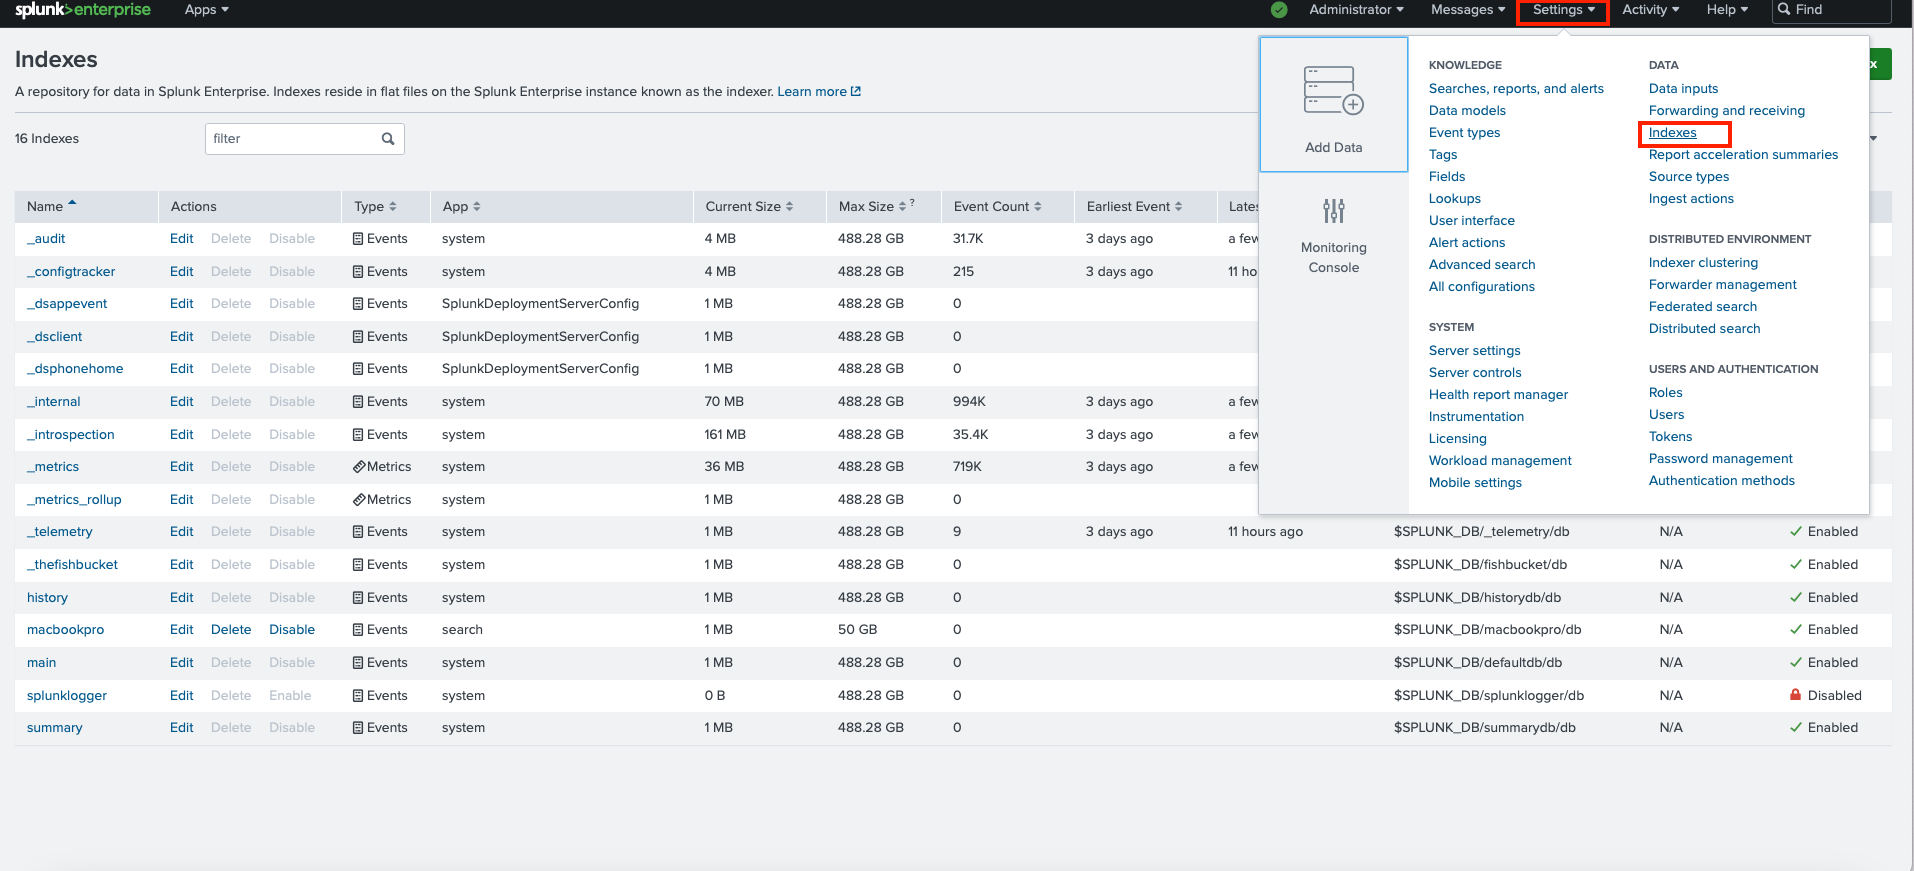 Interface of Splunk Enterprise displaying a list of indexes with details like name, size, and event count.